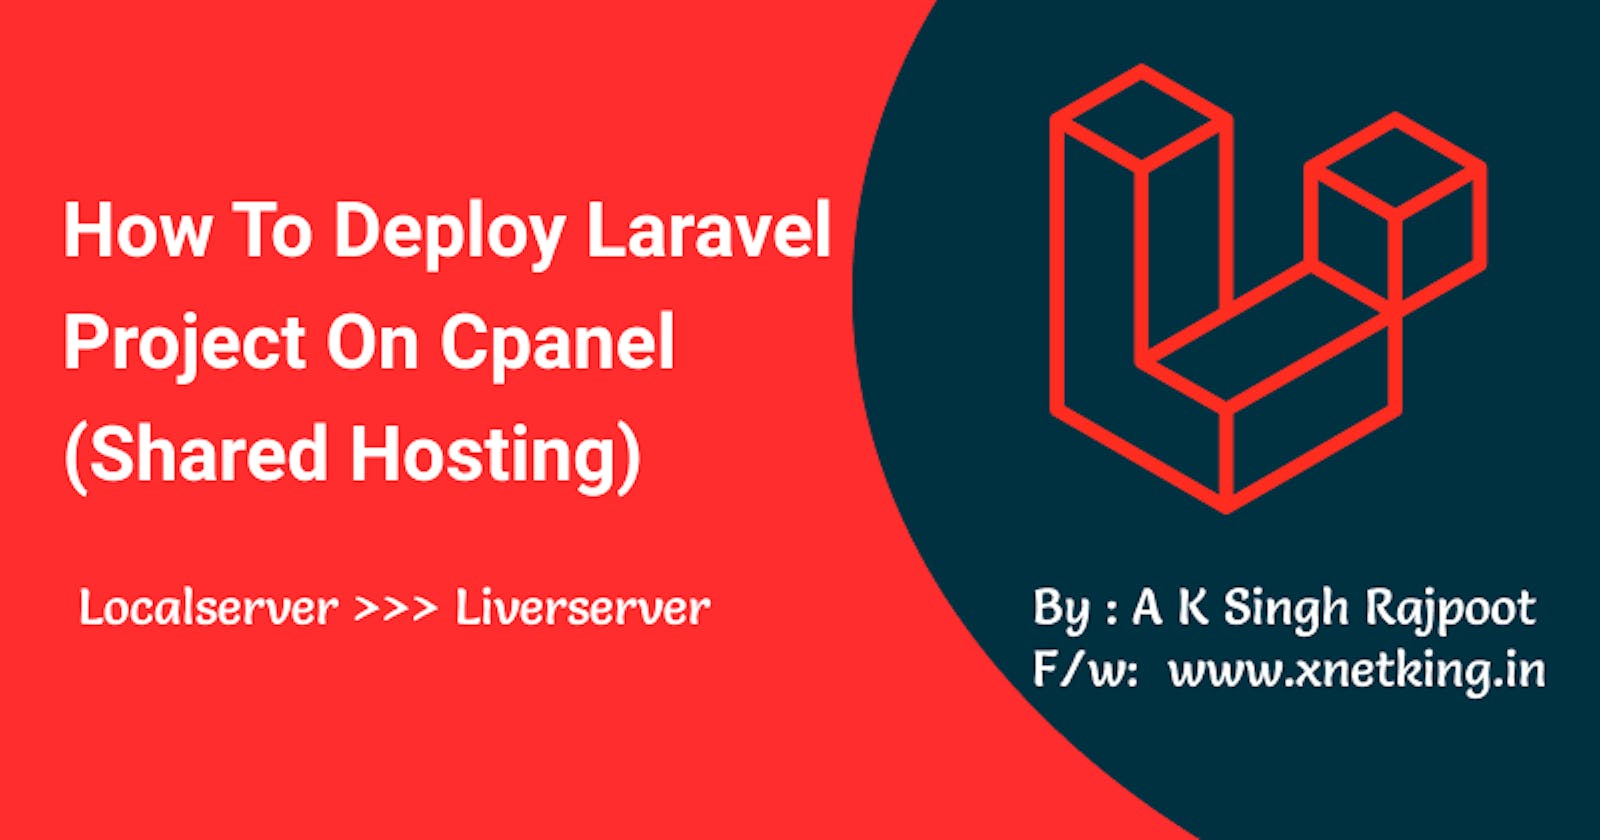 Deploy Your Laravel Project On C-Panel (Shared Hosting)